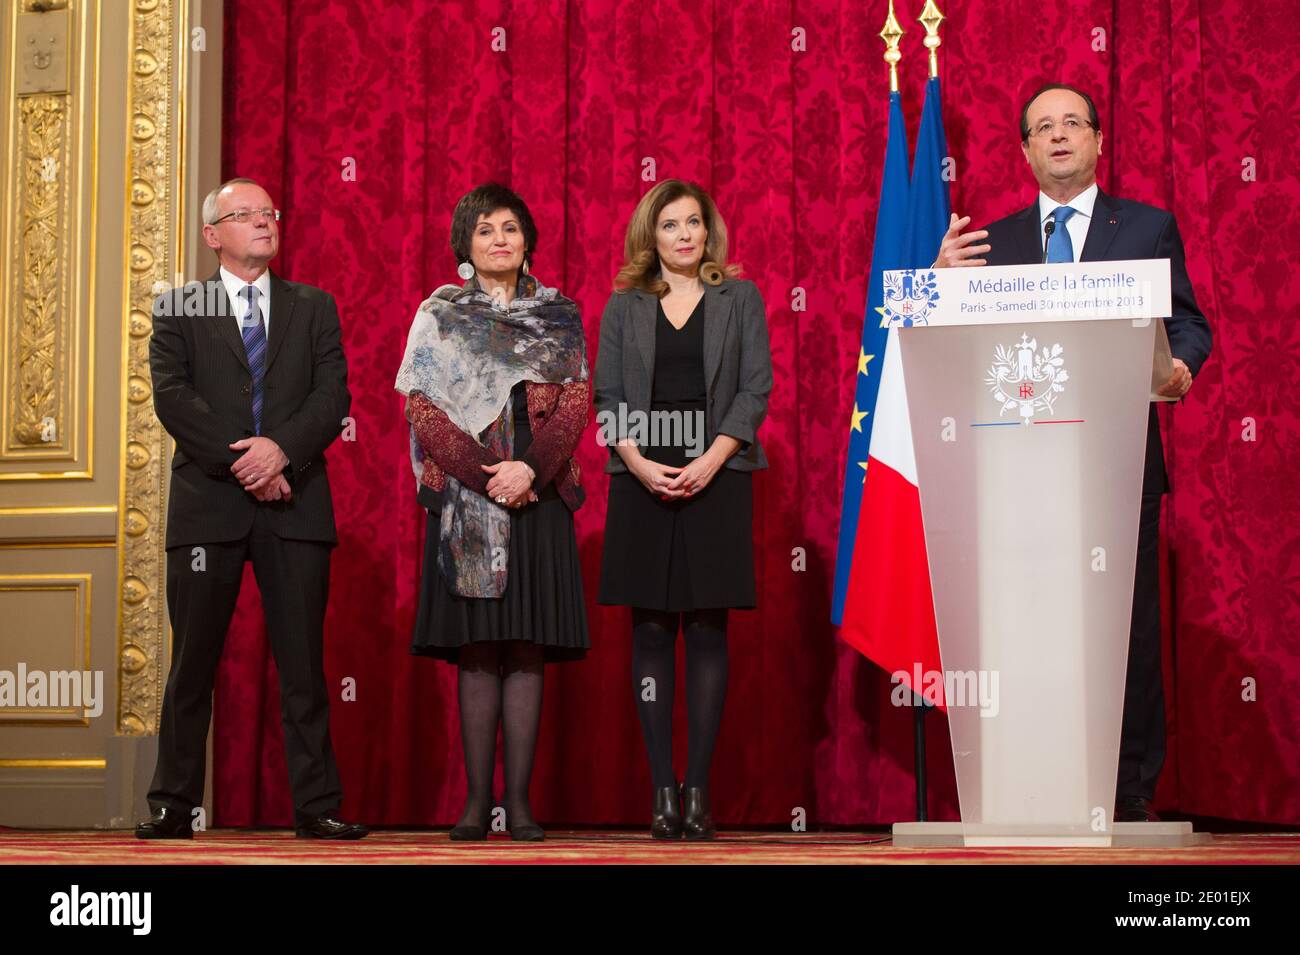 French President Francois Hollande delivers his speech watched by his companion Valerie Trierweiler and Junior Minister for the Disabled Marie-Arlette Carlotti during the annual awarding ceremony of La Medaille de la Famille Francaise (Medal of the French Family), at the Elysee Palace in Paris, France on November 30, 2013. The award is to honour those who have successfully raised several children with dignity. Photo by Nicolas Gouhier/ABACAPRESS.COM Stock Photo